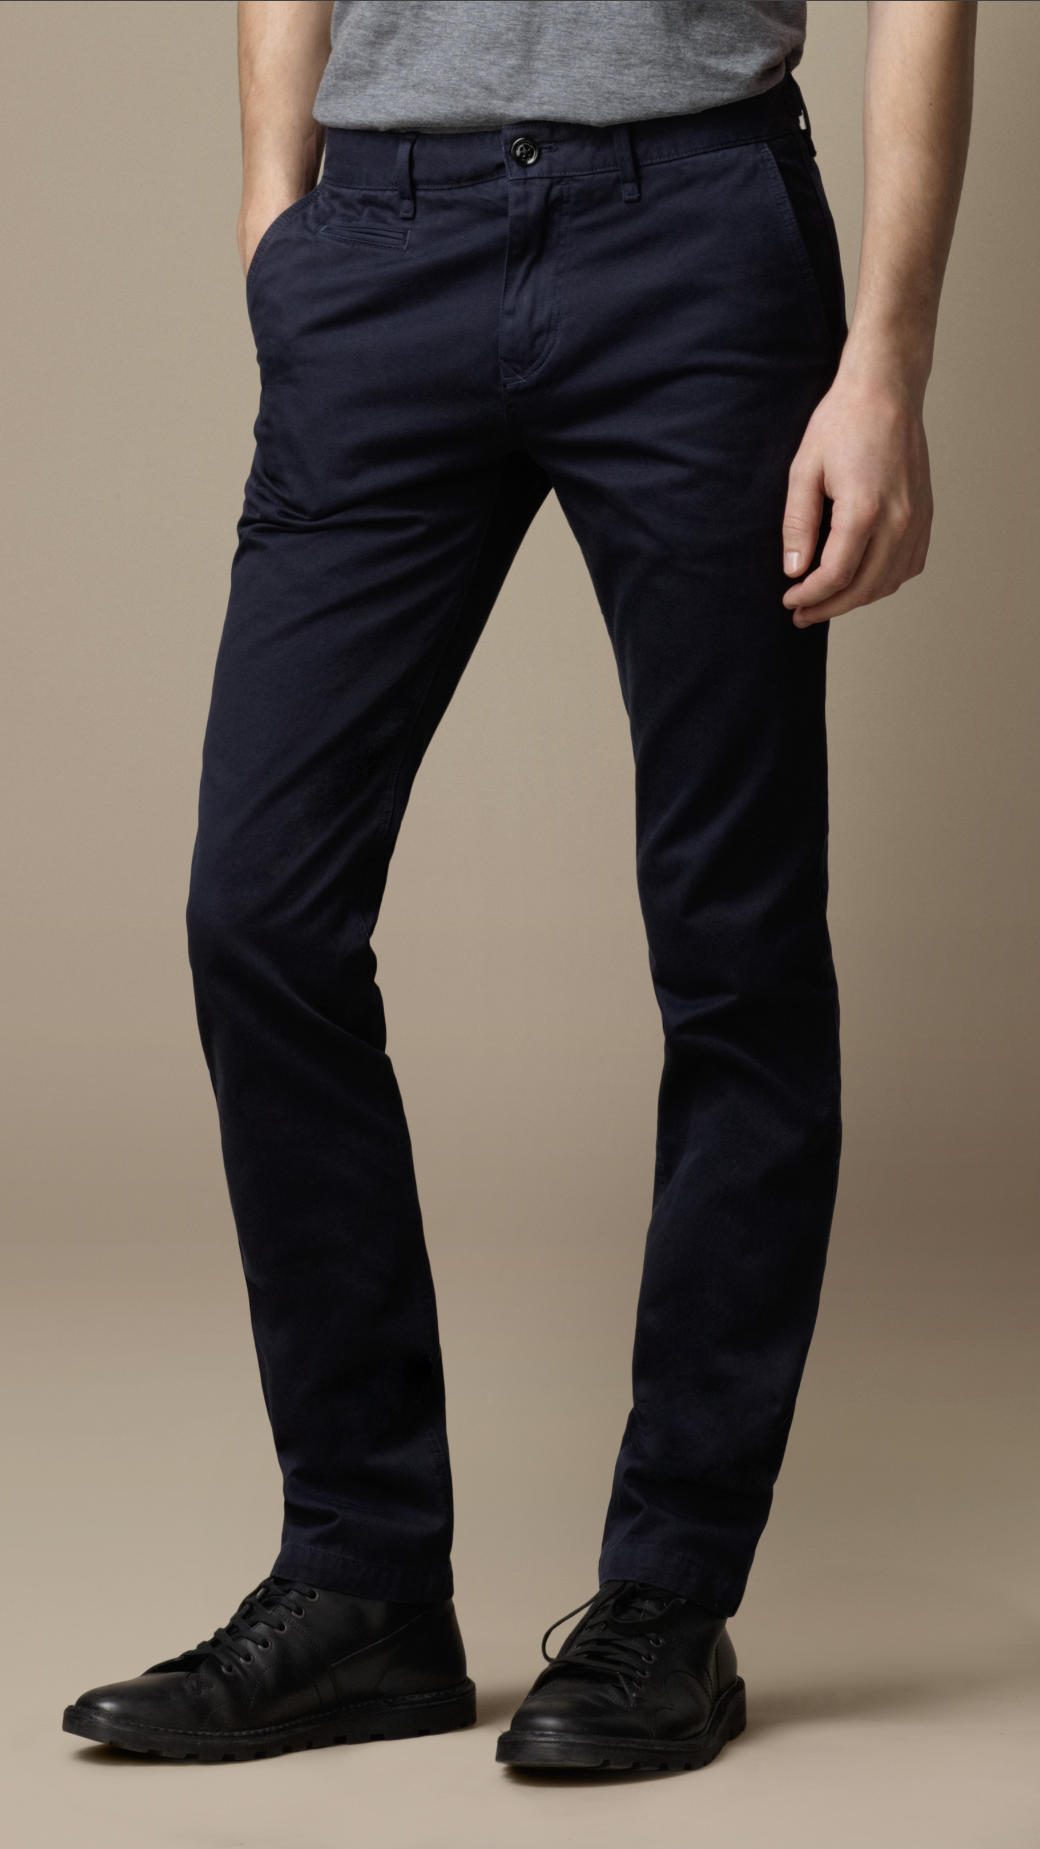 Lyst - Burberry Brit Slim Fit Cotton Chino Trousers in Blue for Men